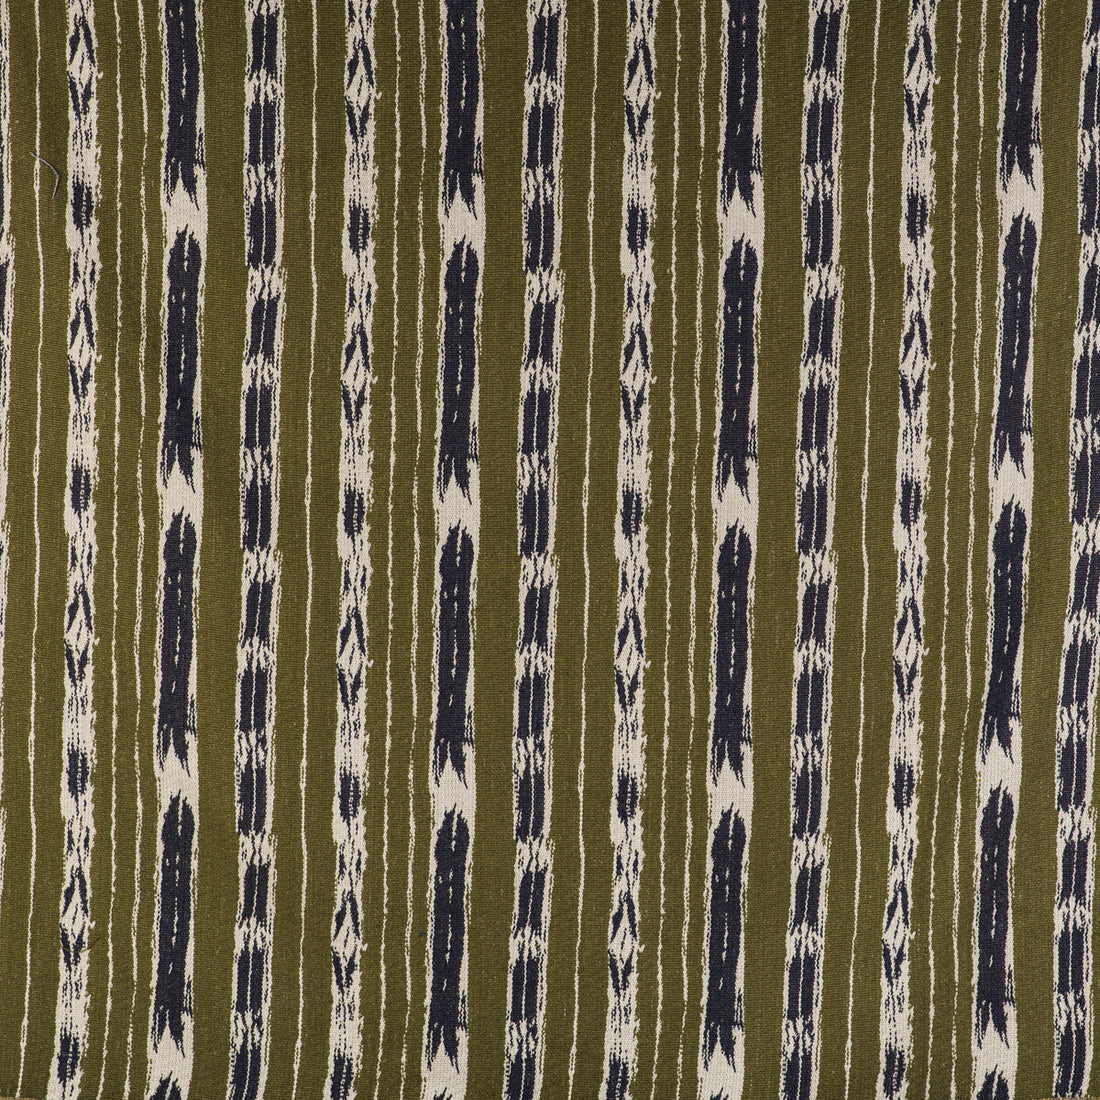 Bandas fabric in verde/navy color - pattern GDT5497.001.0 - by Gaston y Daniela in the Gaston Libreria collection